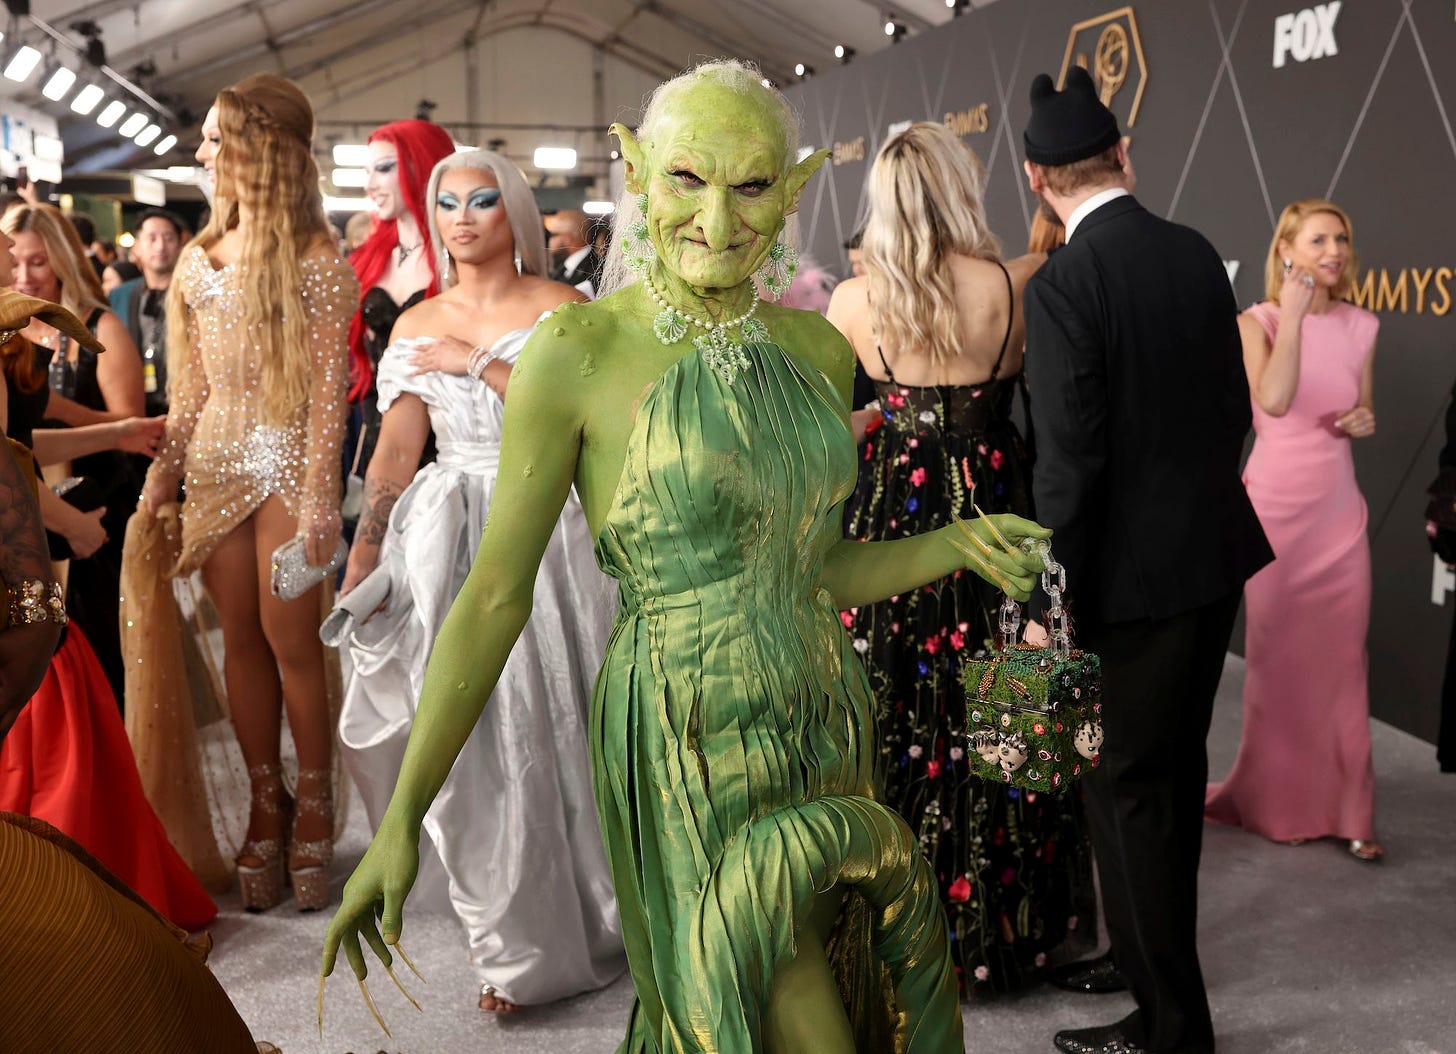 Why Princess Poppy was dressed as a green troll at the Emmy Awards | CNN